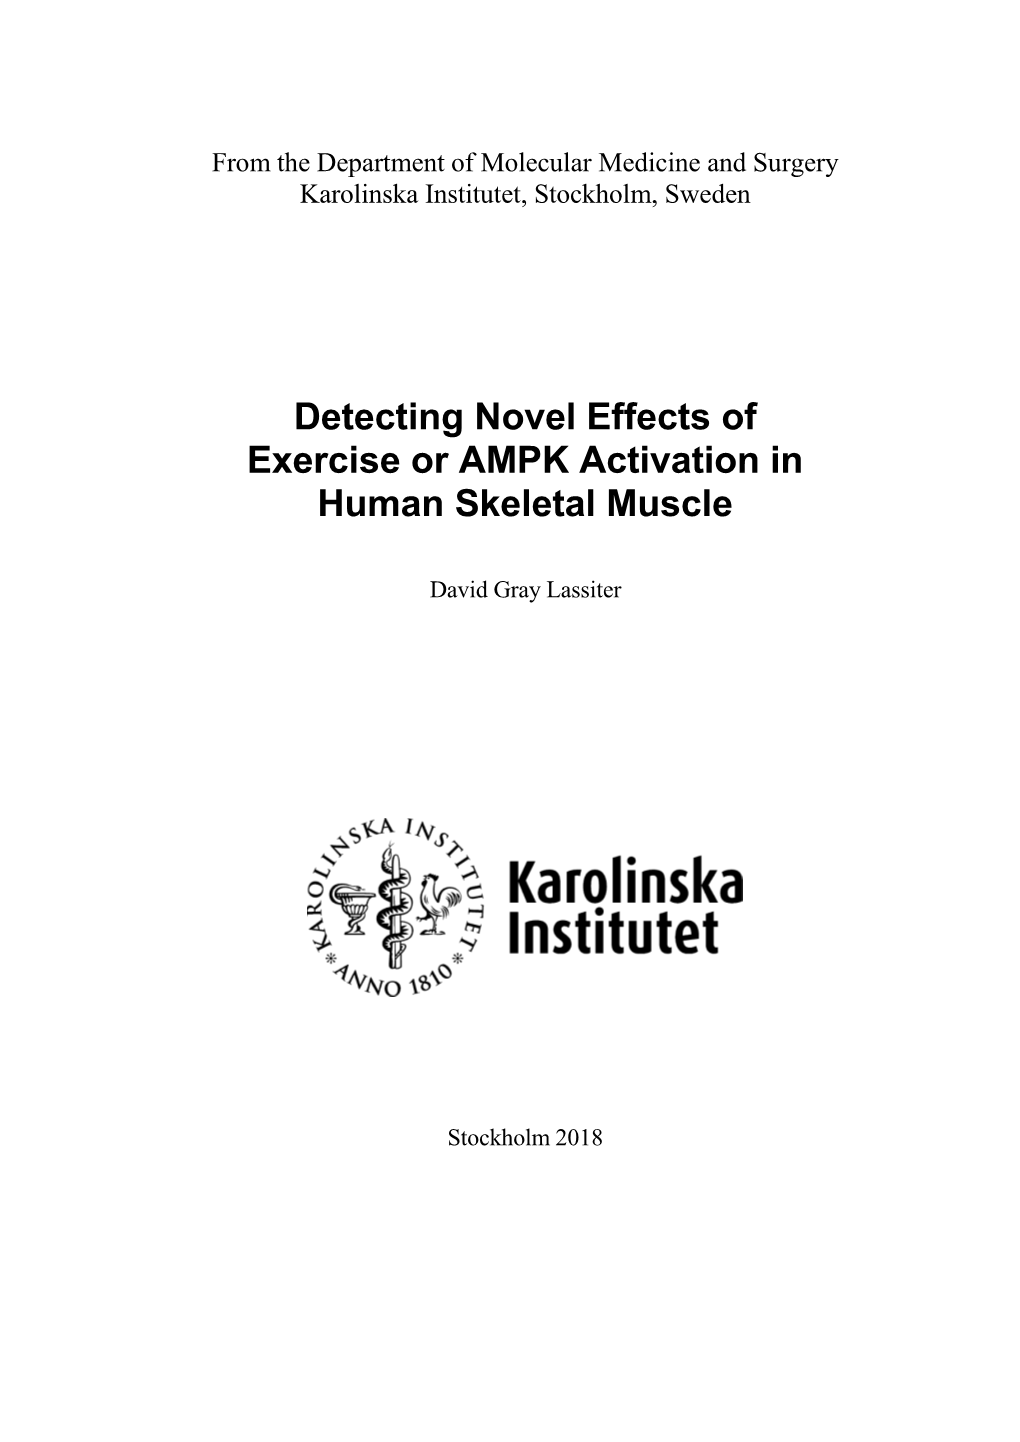 Detecting Novel Effects of Exercise Or AMPK Activation in Human Skeletal Muscle